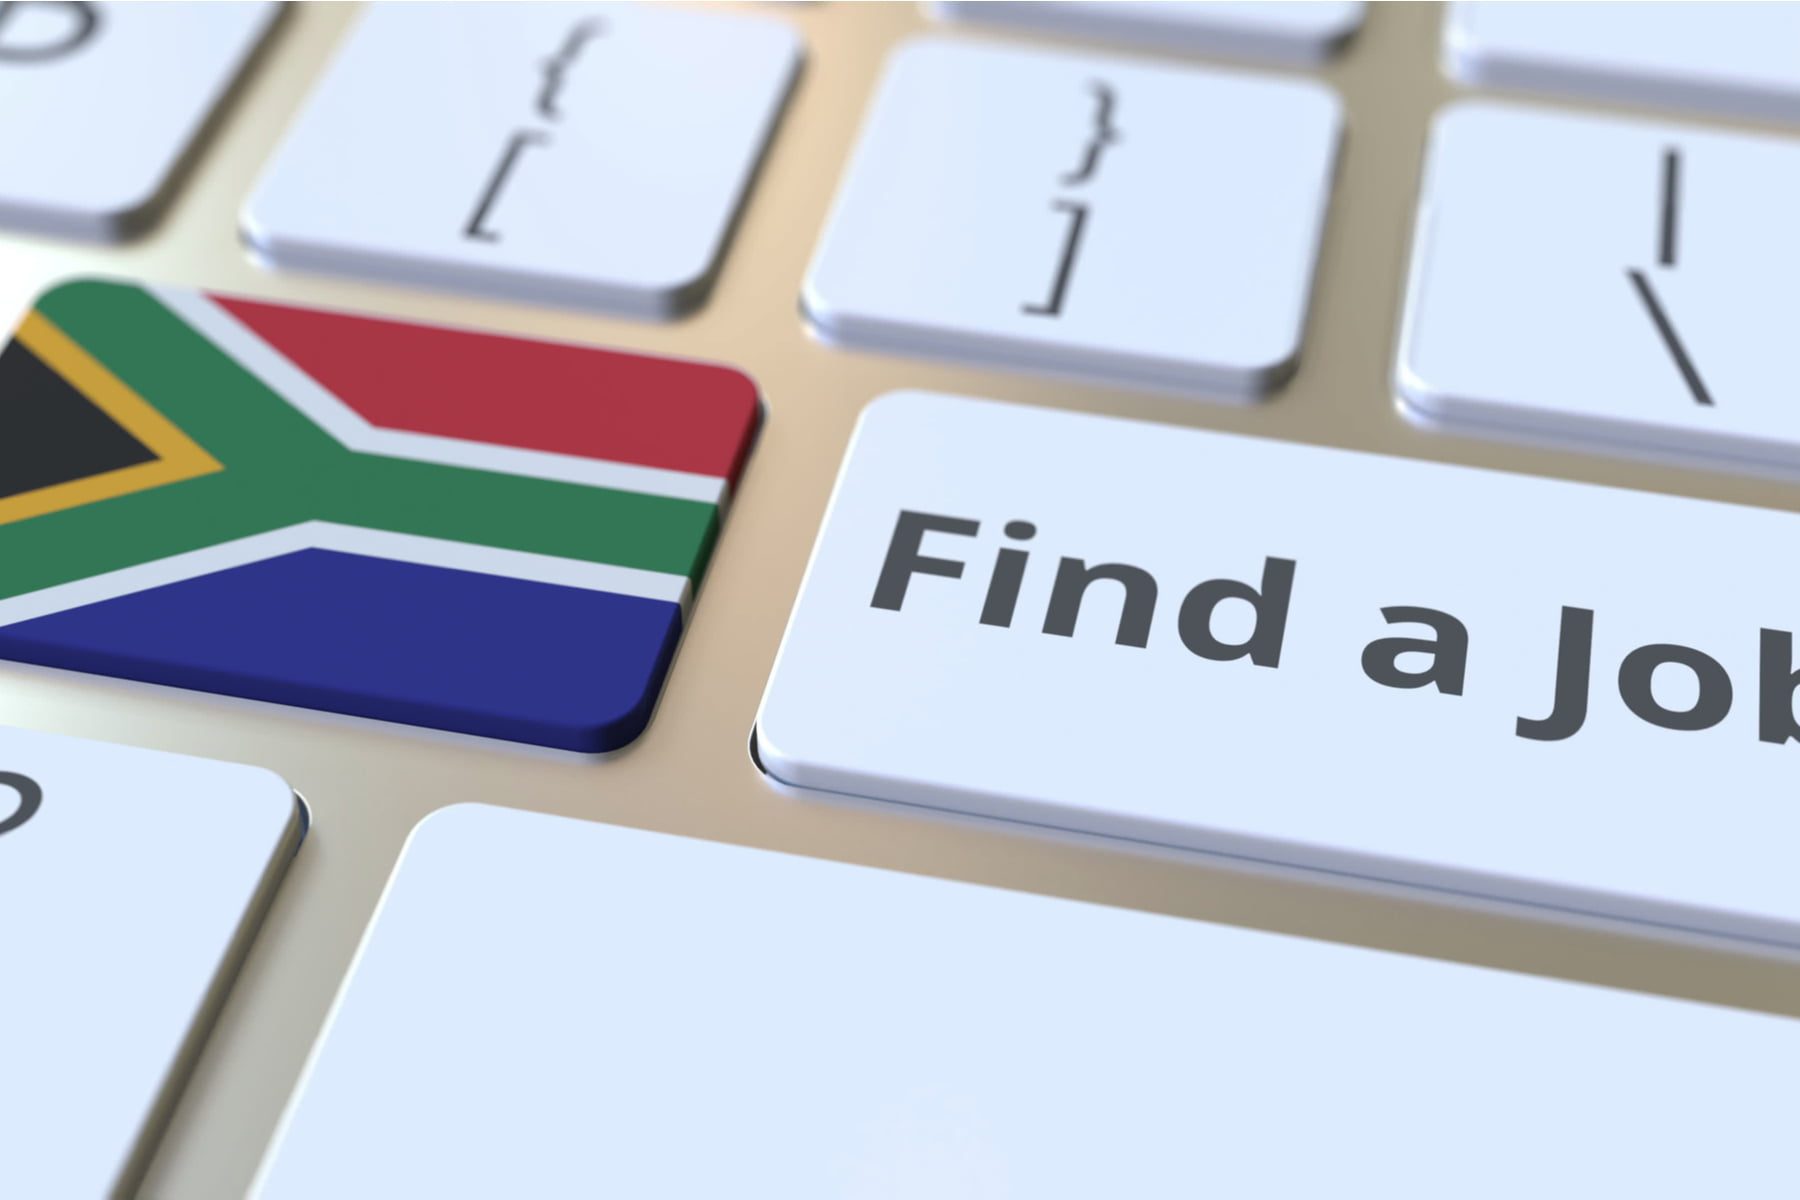 Customer Service Team Leader | Jobs in South Africa 2020